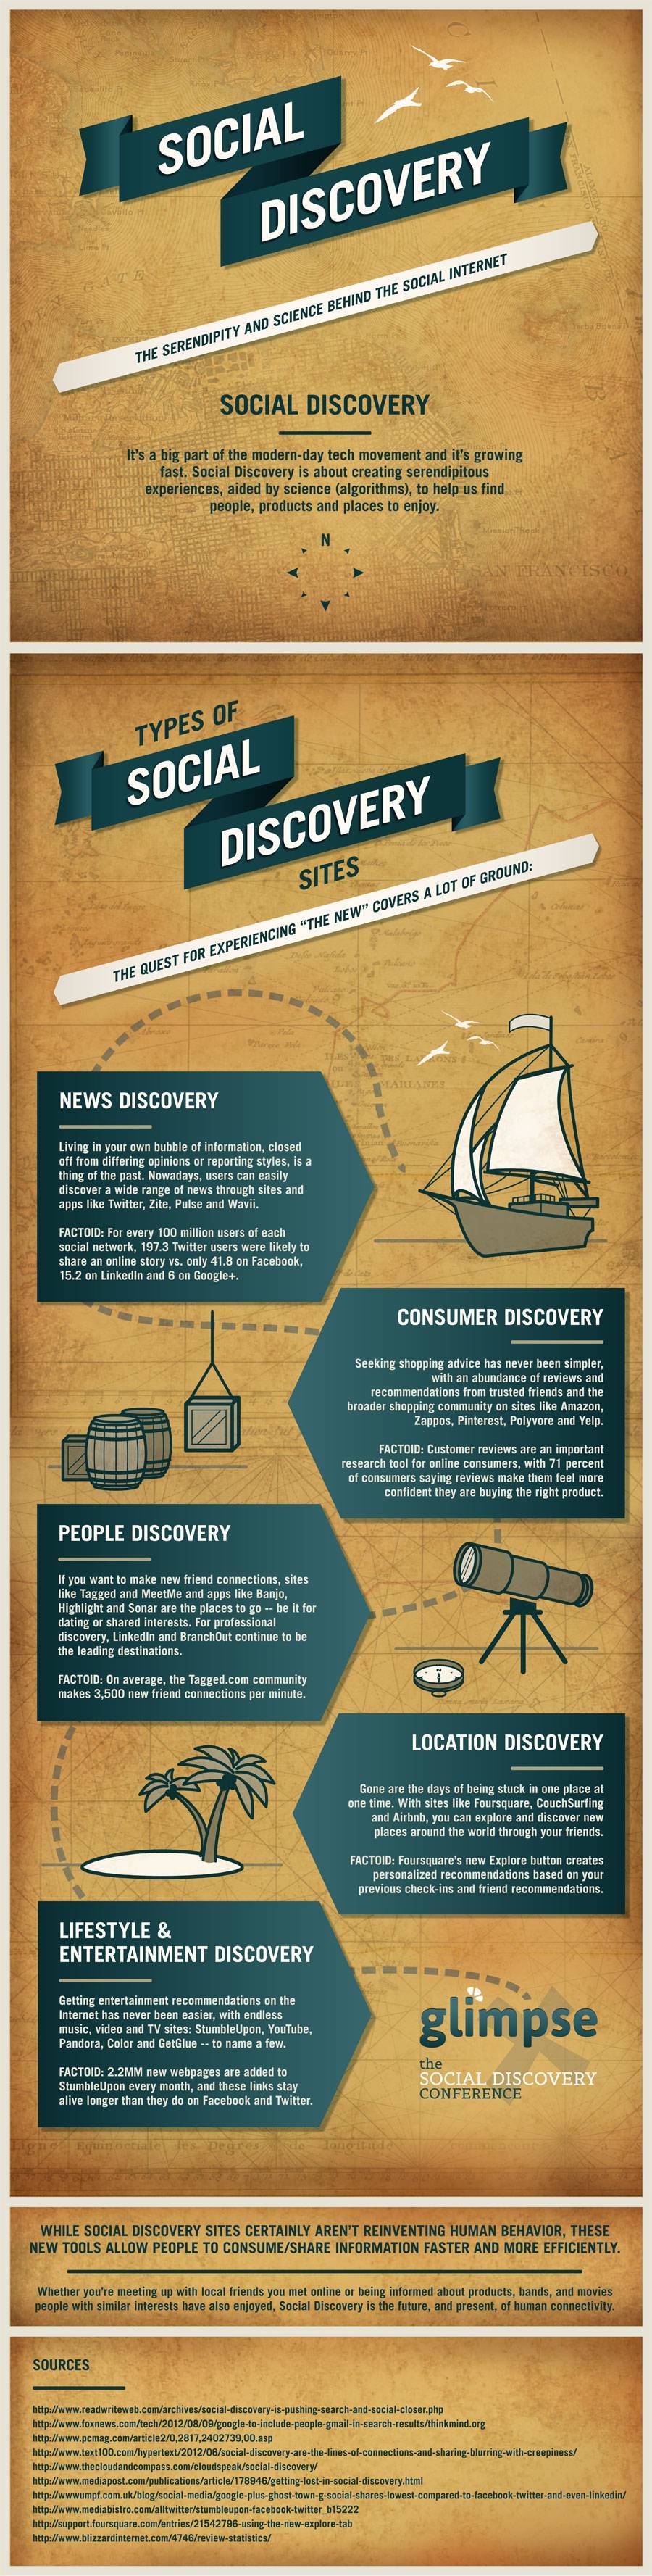 Social Discovery Tools Will Rejuvenate Any Following [Infographic]